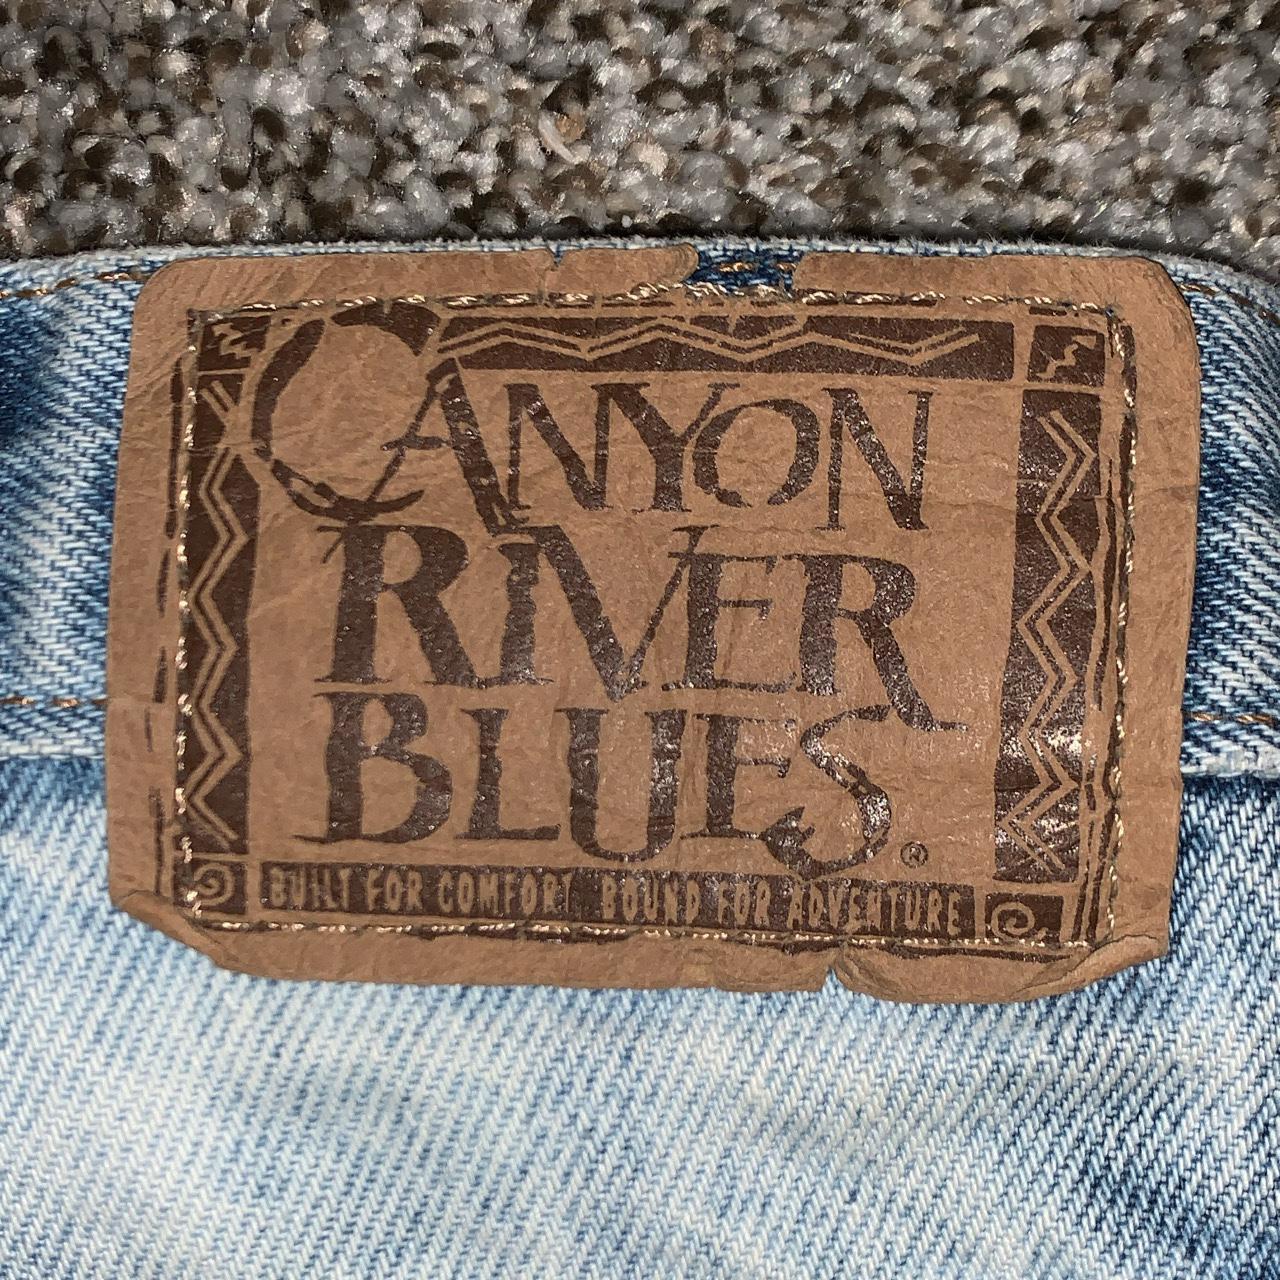 Canyon River Blues Men's Blue and White Jeans (4)